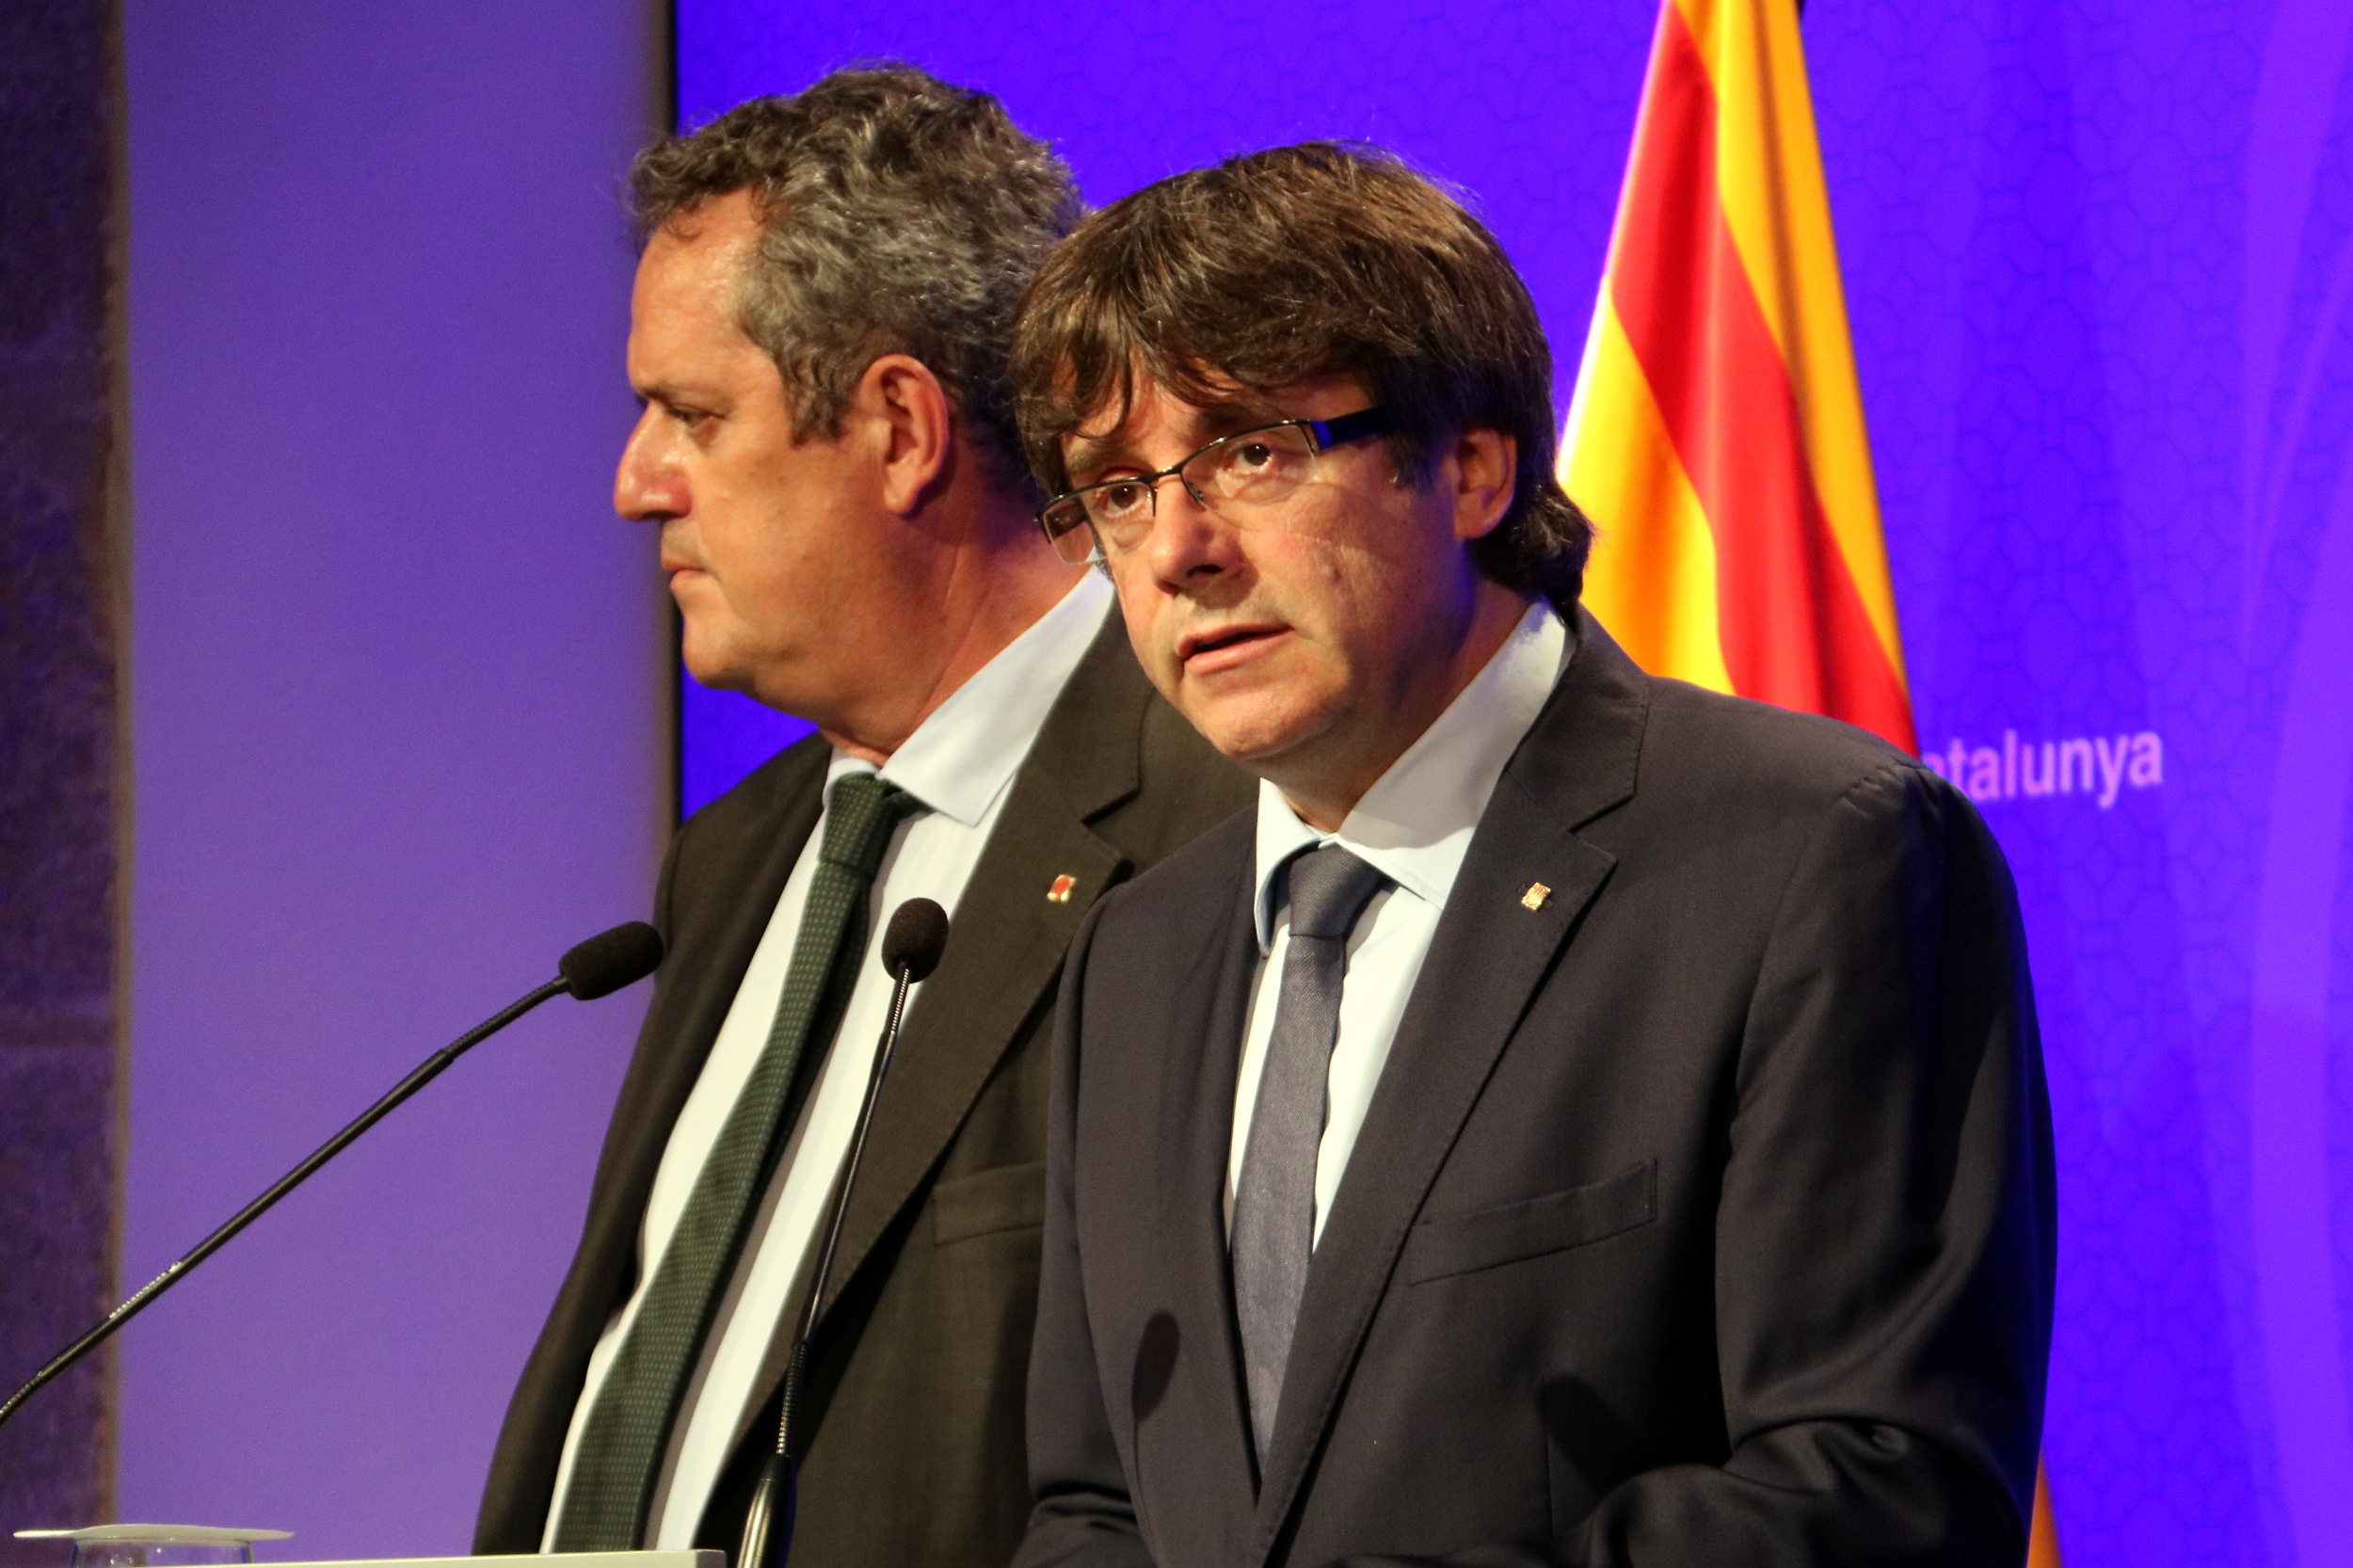 The Catalan president, Carles Puigdemont, speaking next to the home affairs minister, Joaquim Forn